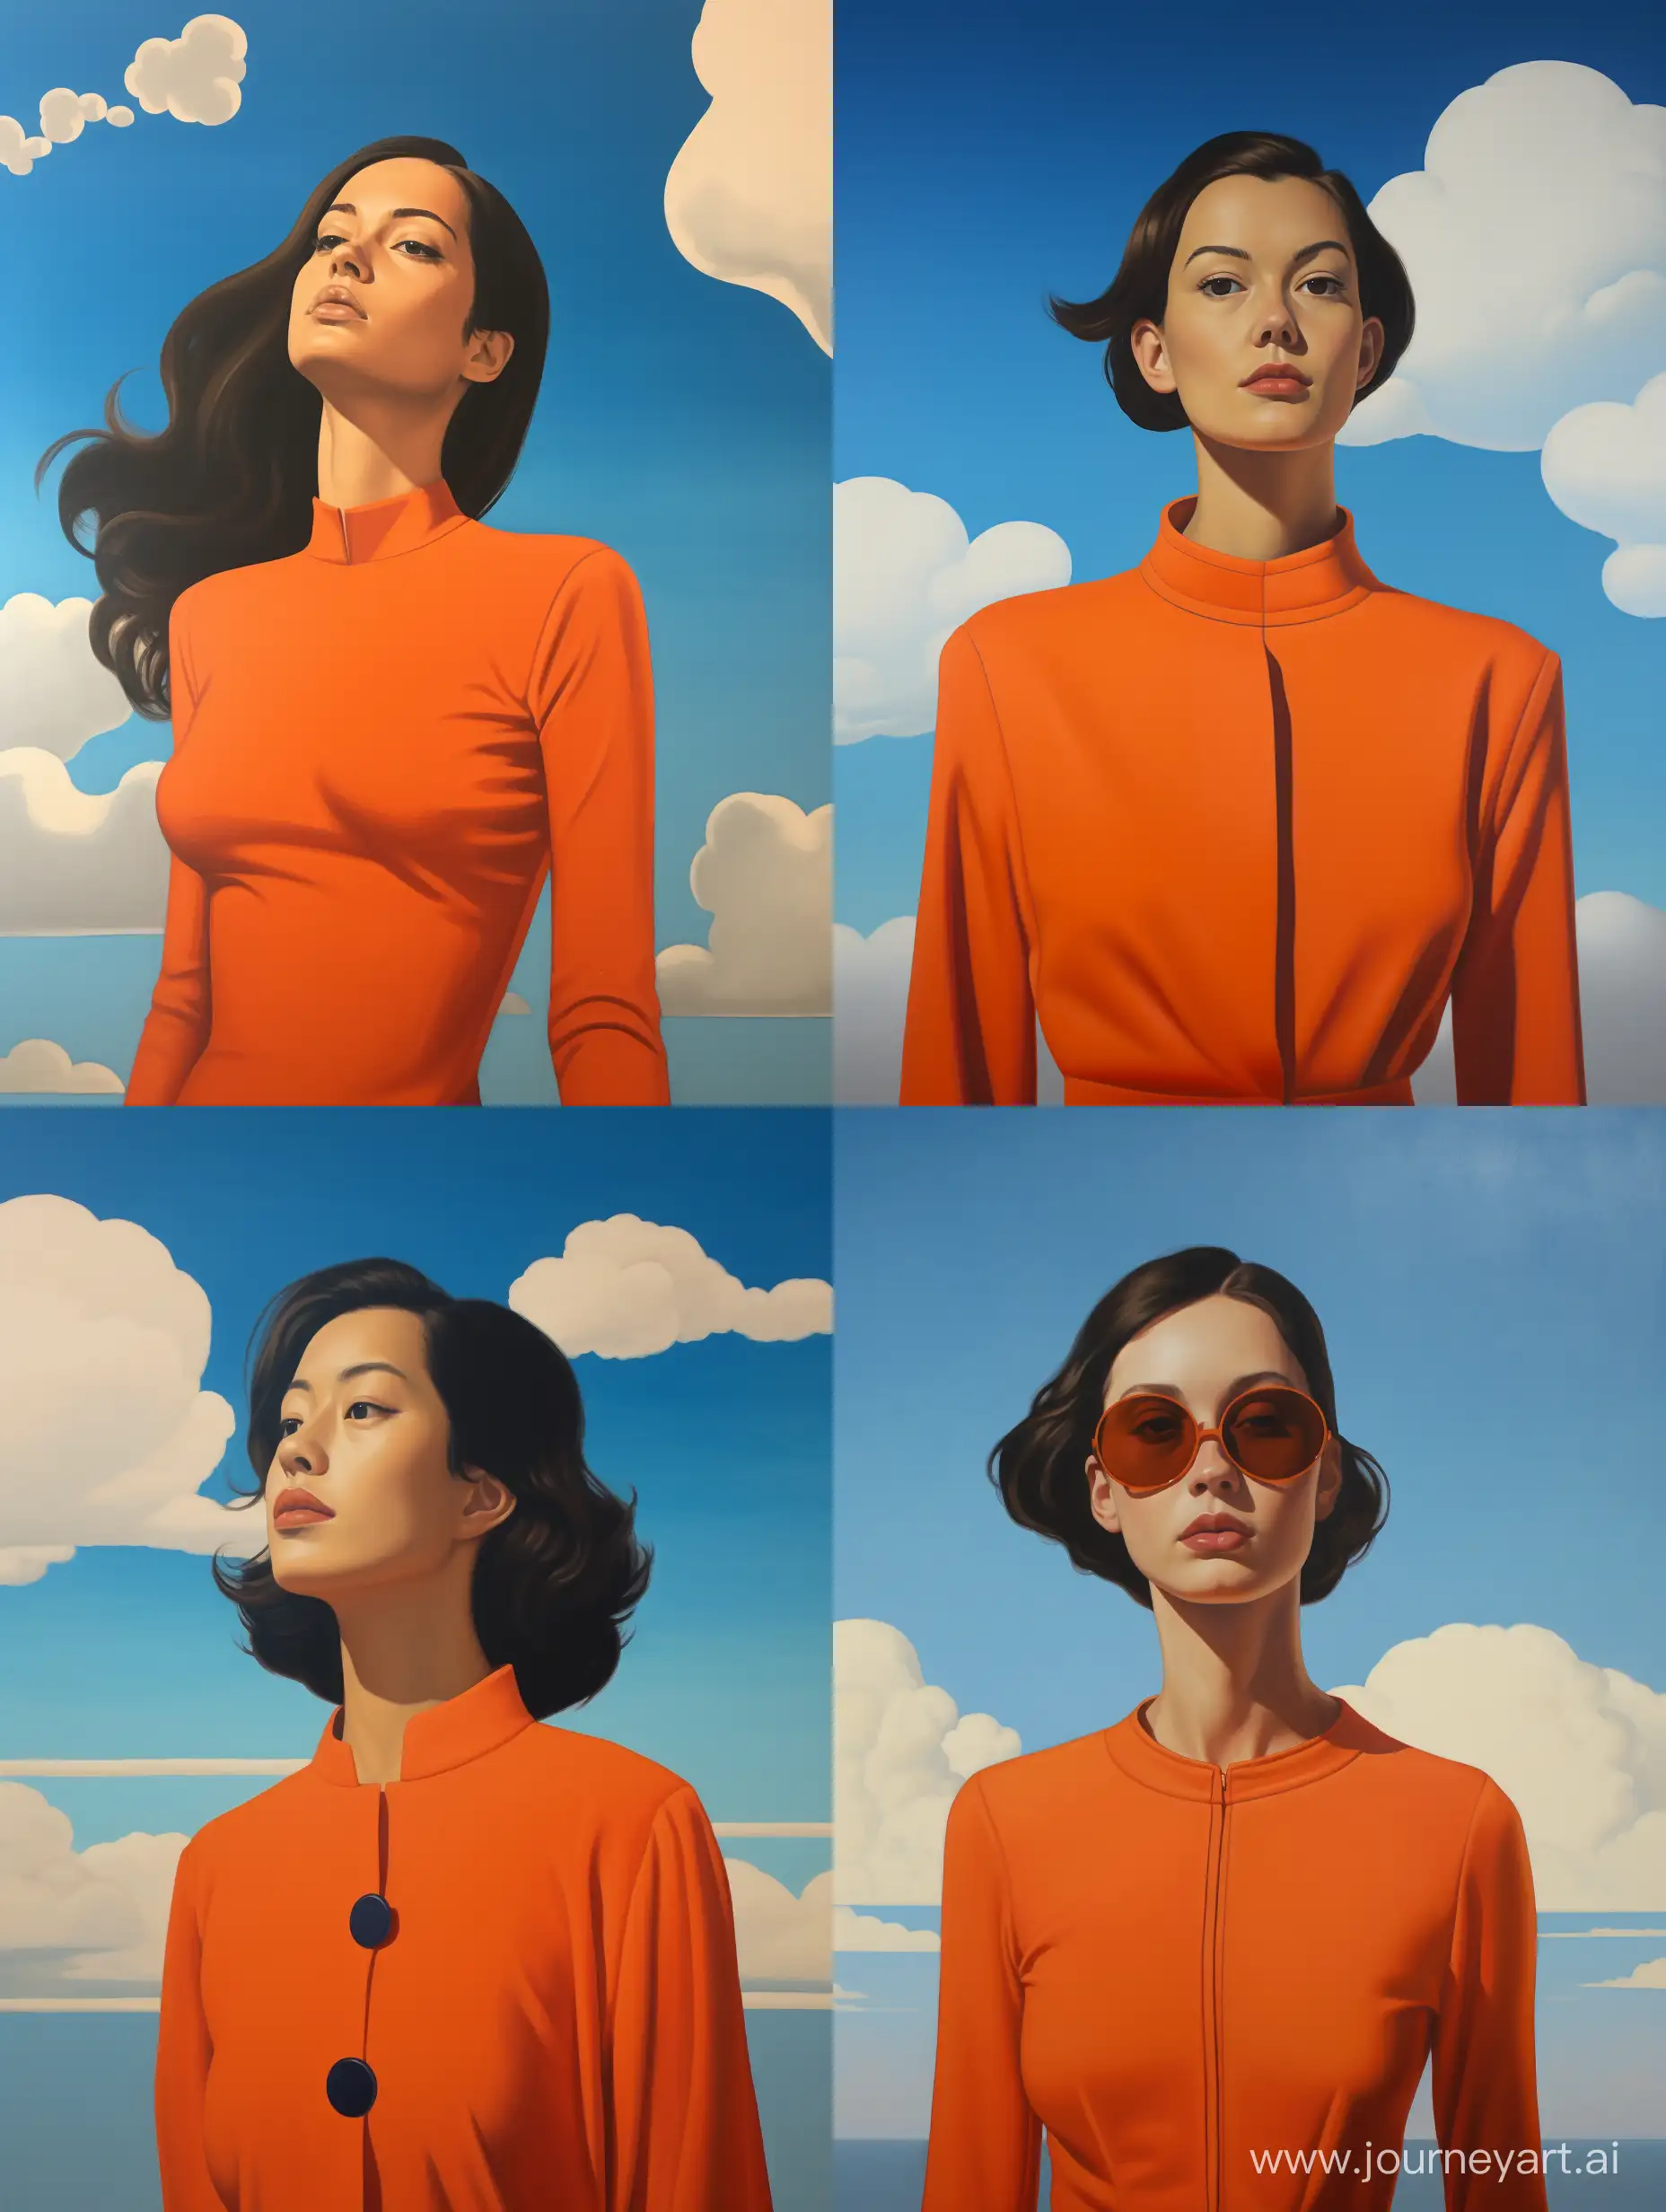 Minimalist-Portrait-of-Young-Woman-in-Orange-Suit-Against-Blue-and-Orange-Sky